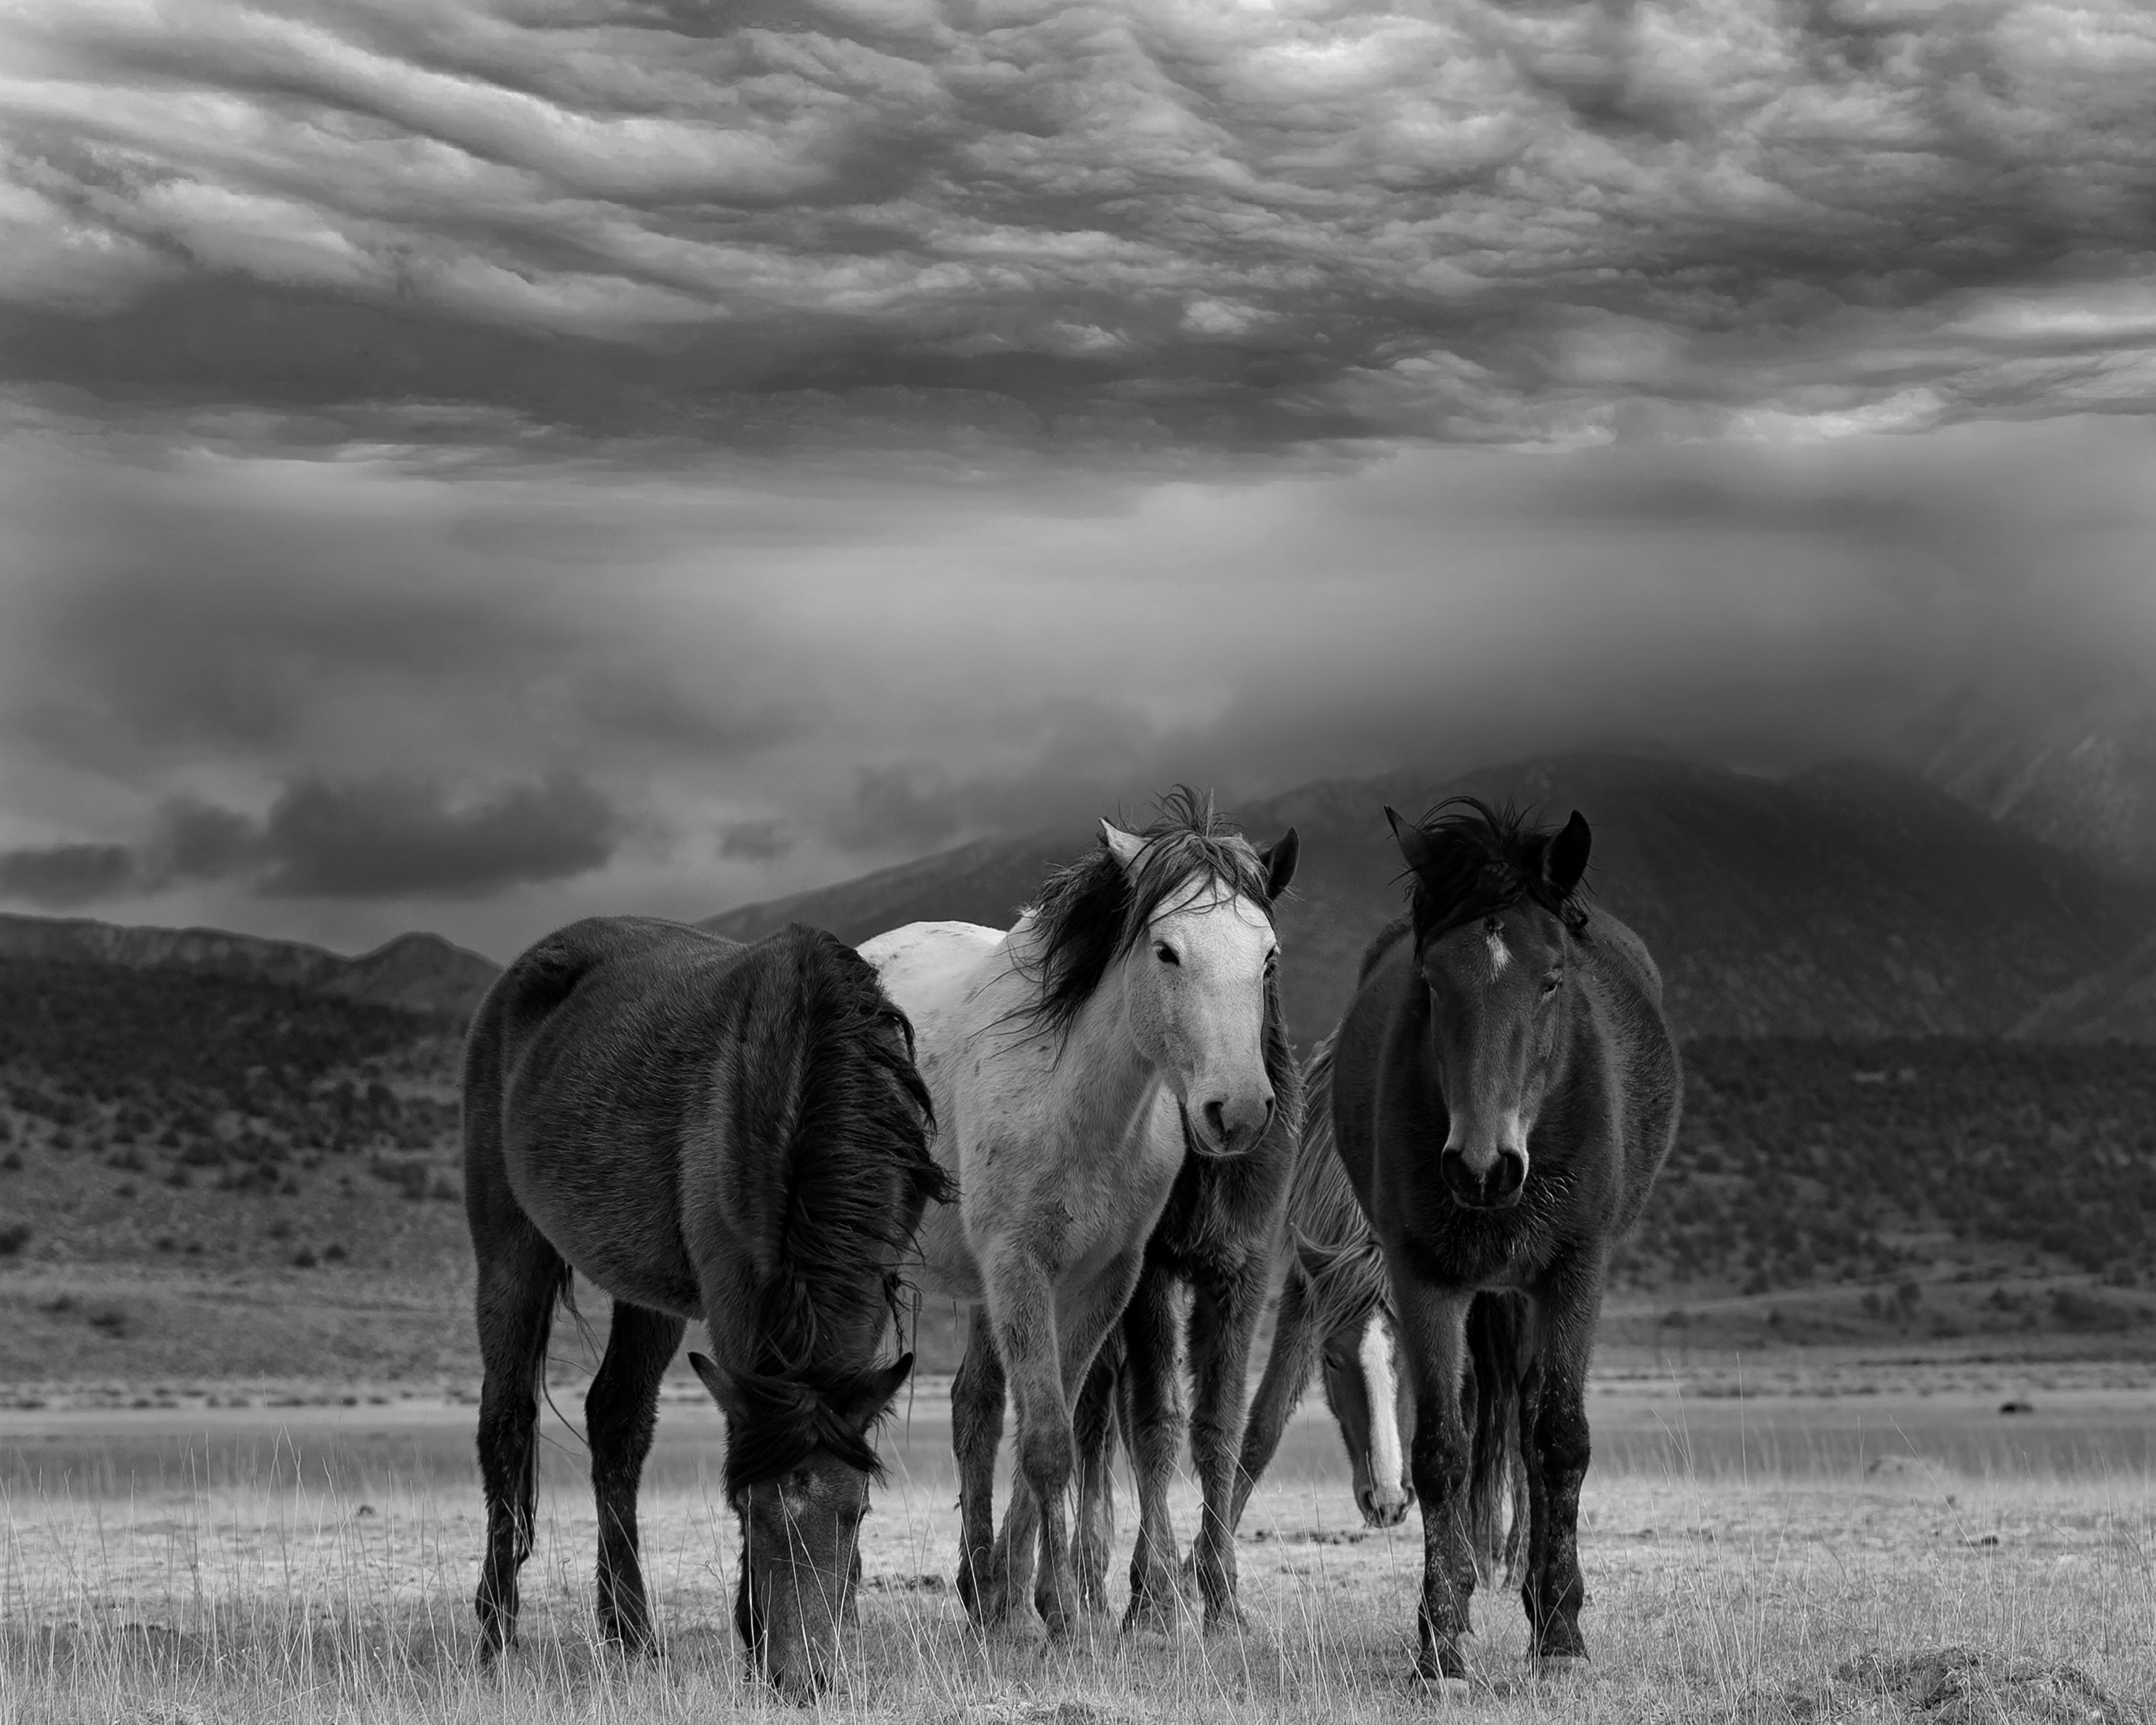 Shane Russeck Animal Print - "Dust and Horses" 30x40 Black and White Photography Wild Horses Mustangs Photo